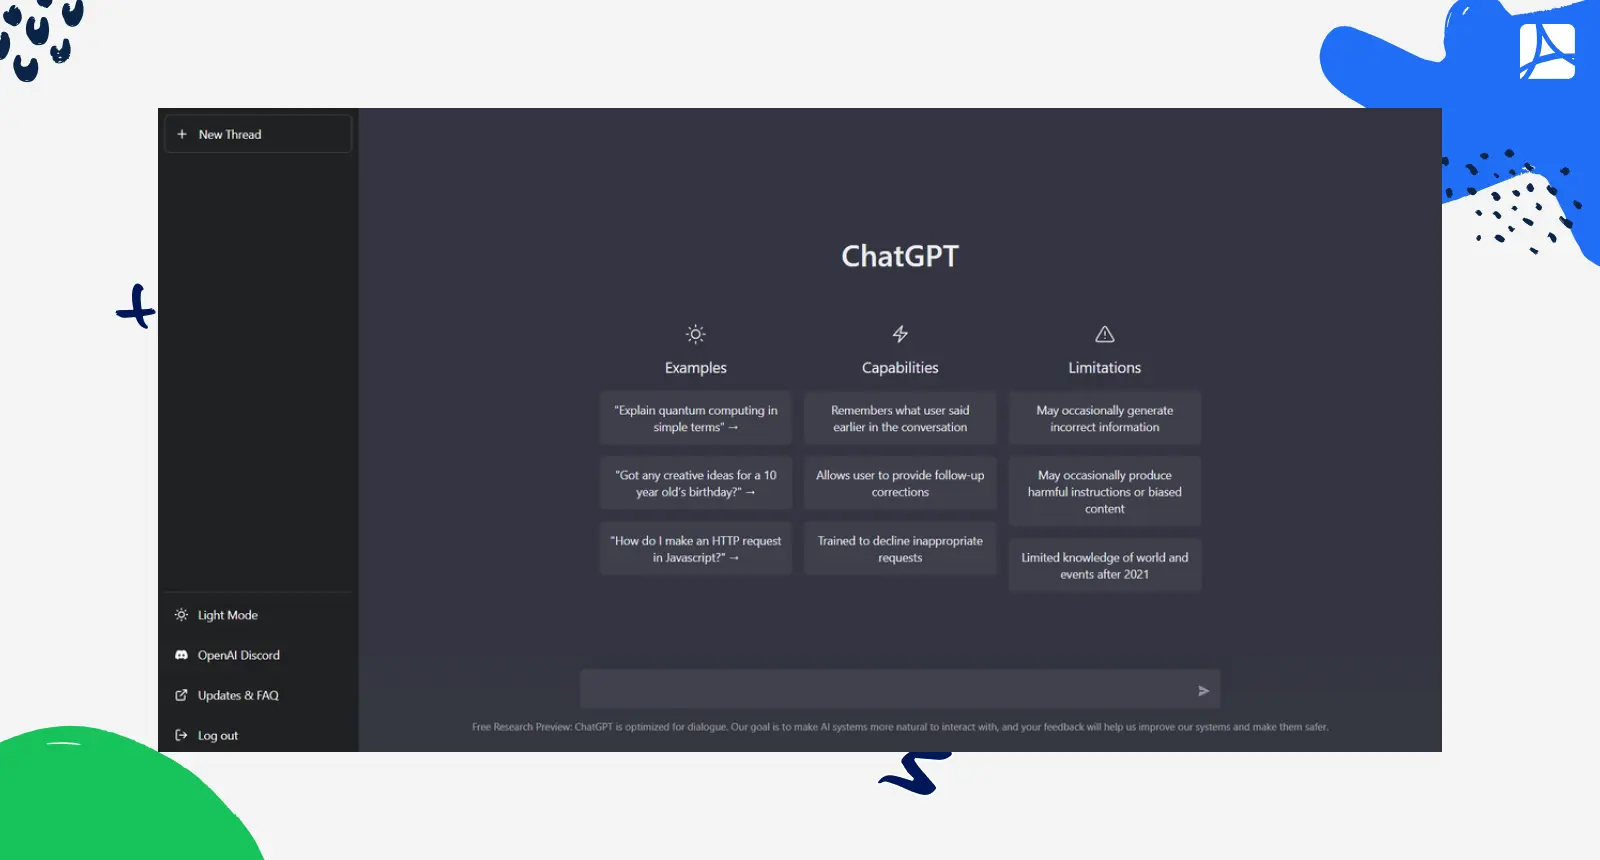 ChatGPT offers users a versatile tool